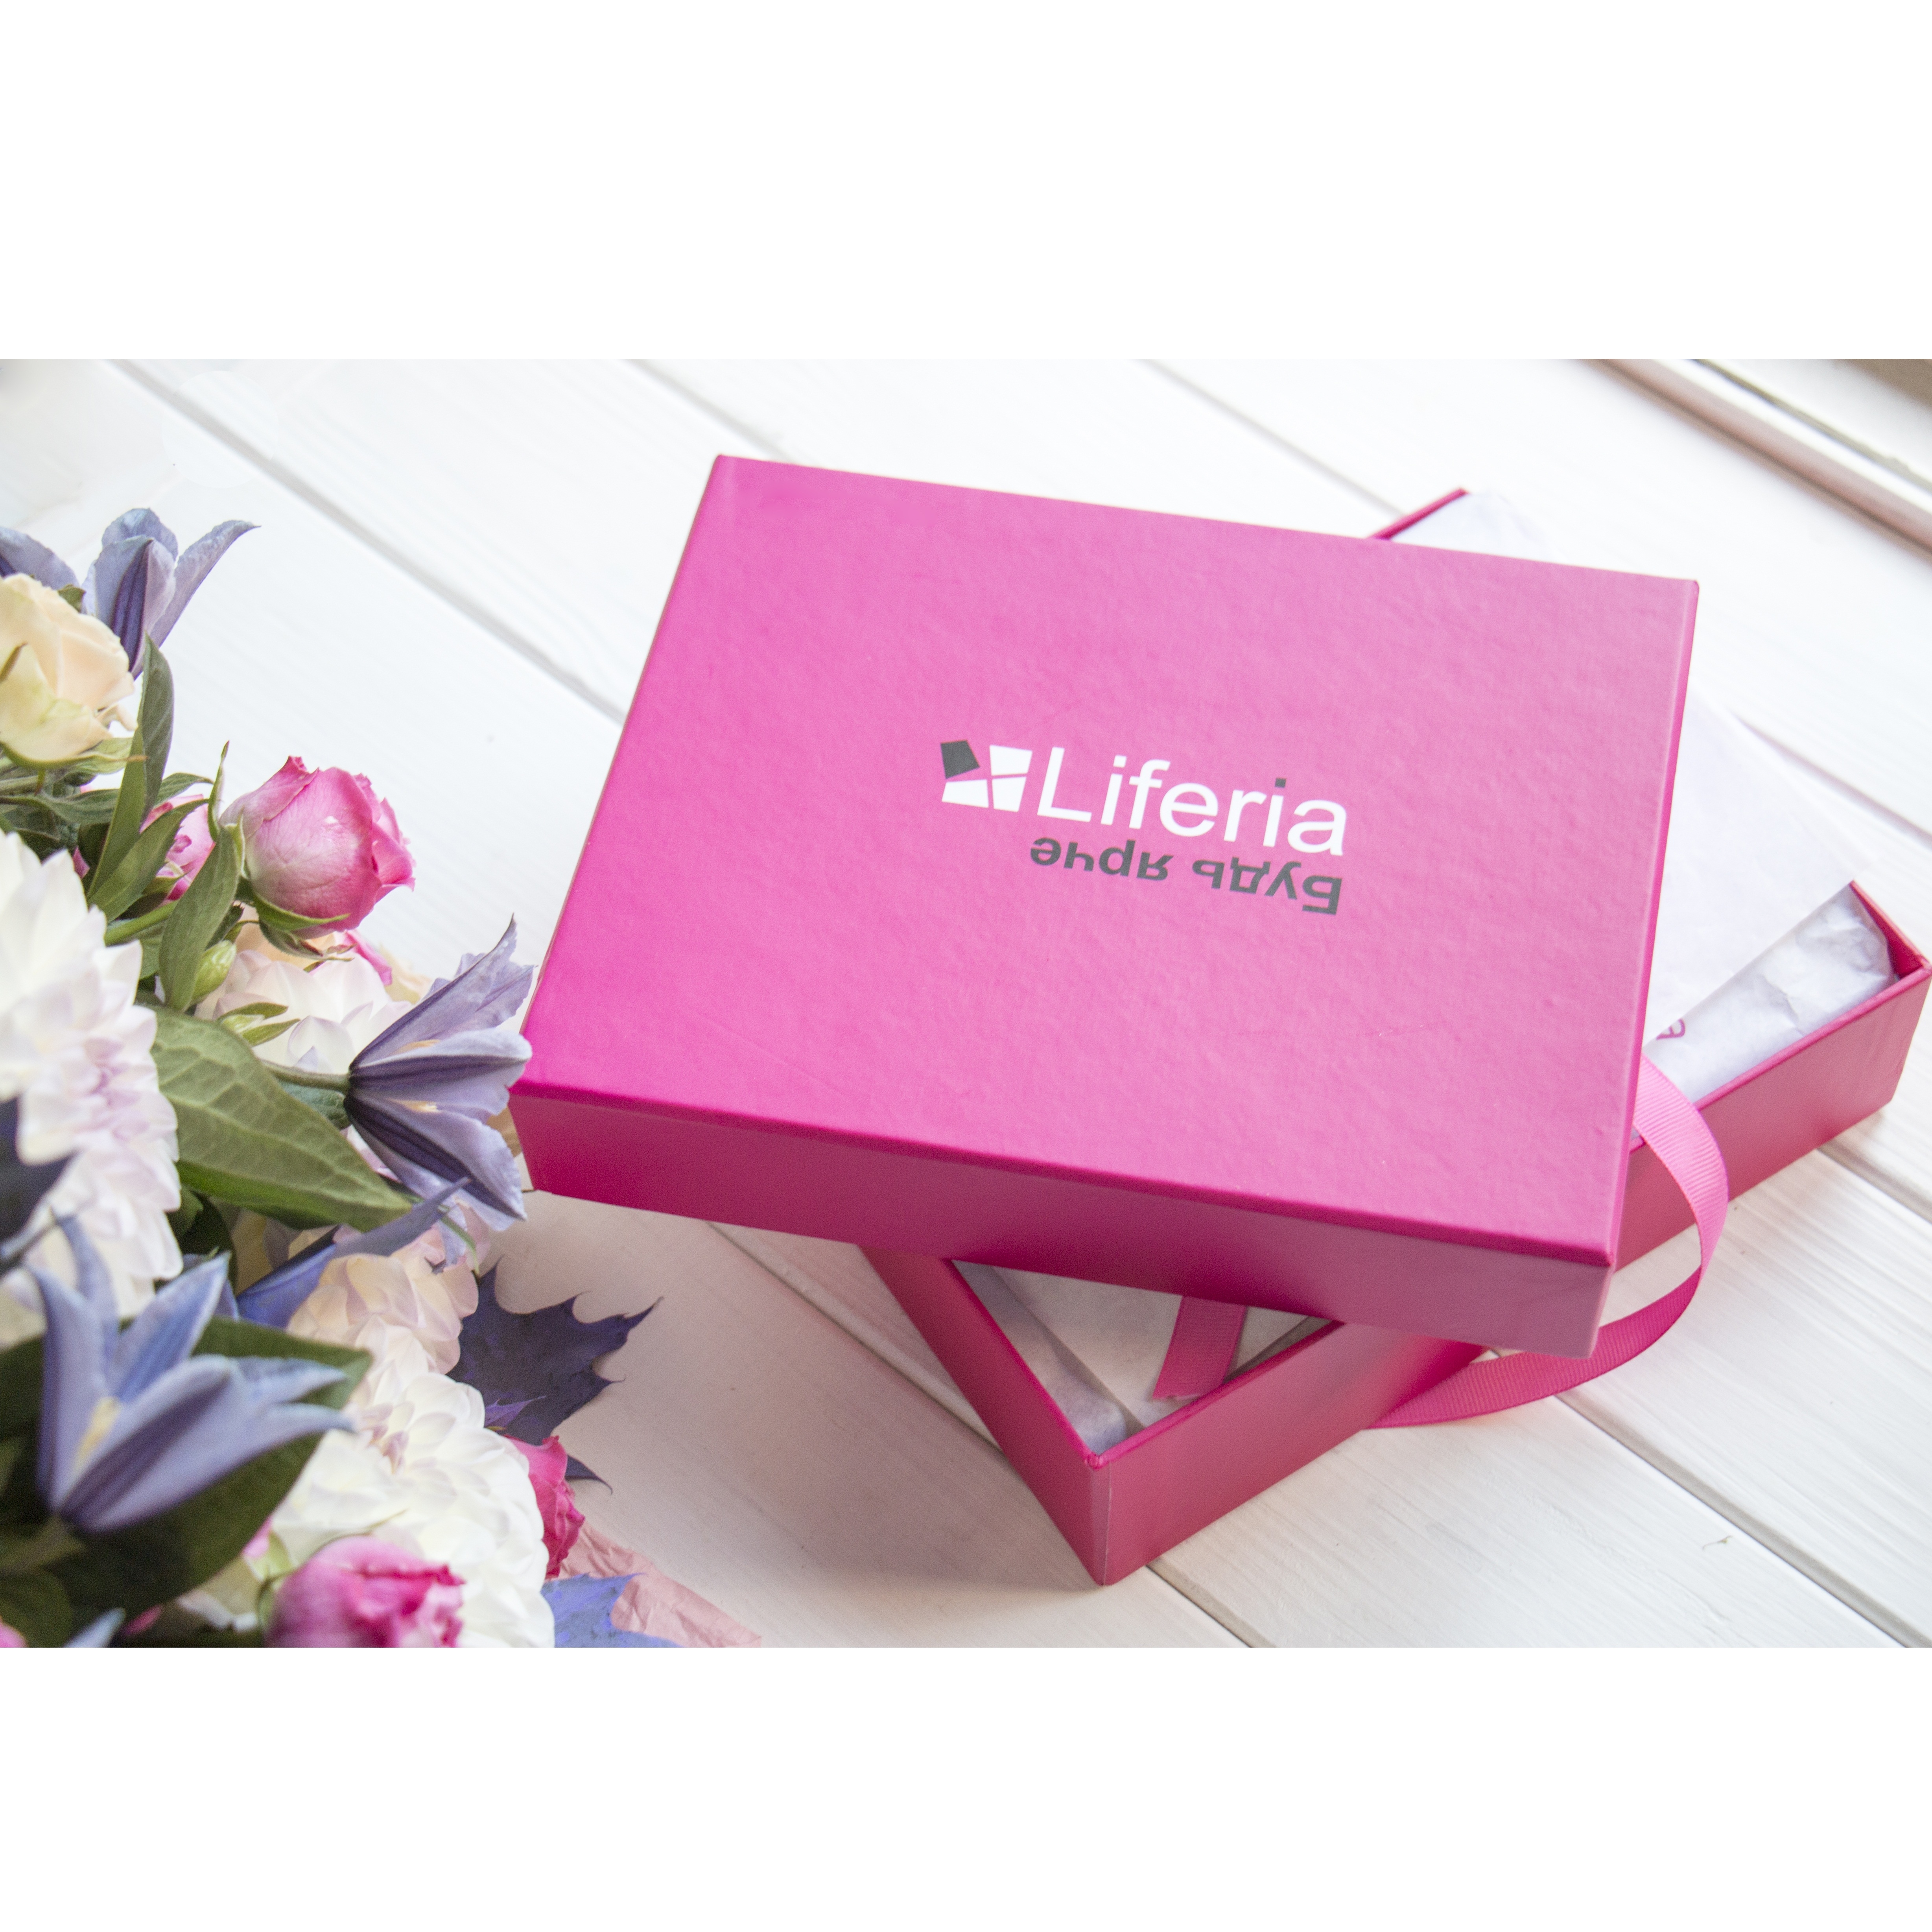 Cosmetics box Liferia order in the online-shop with delivery